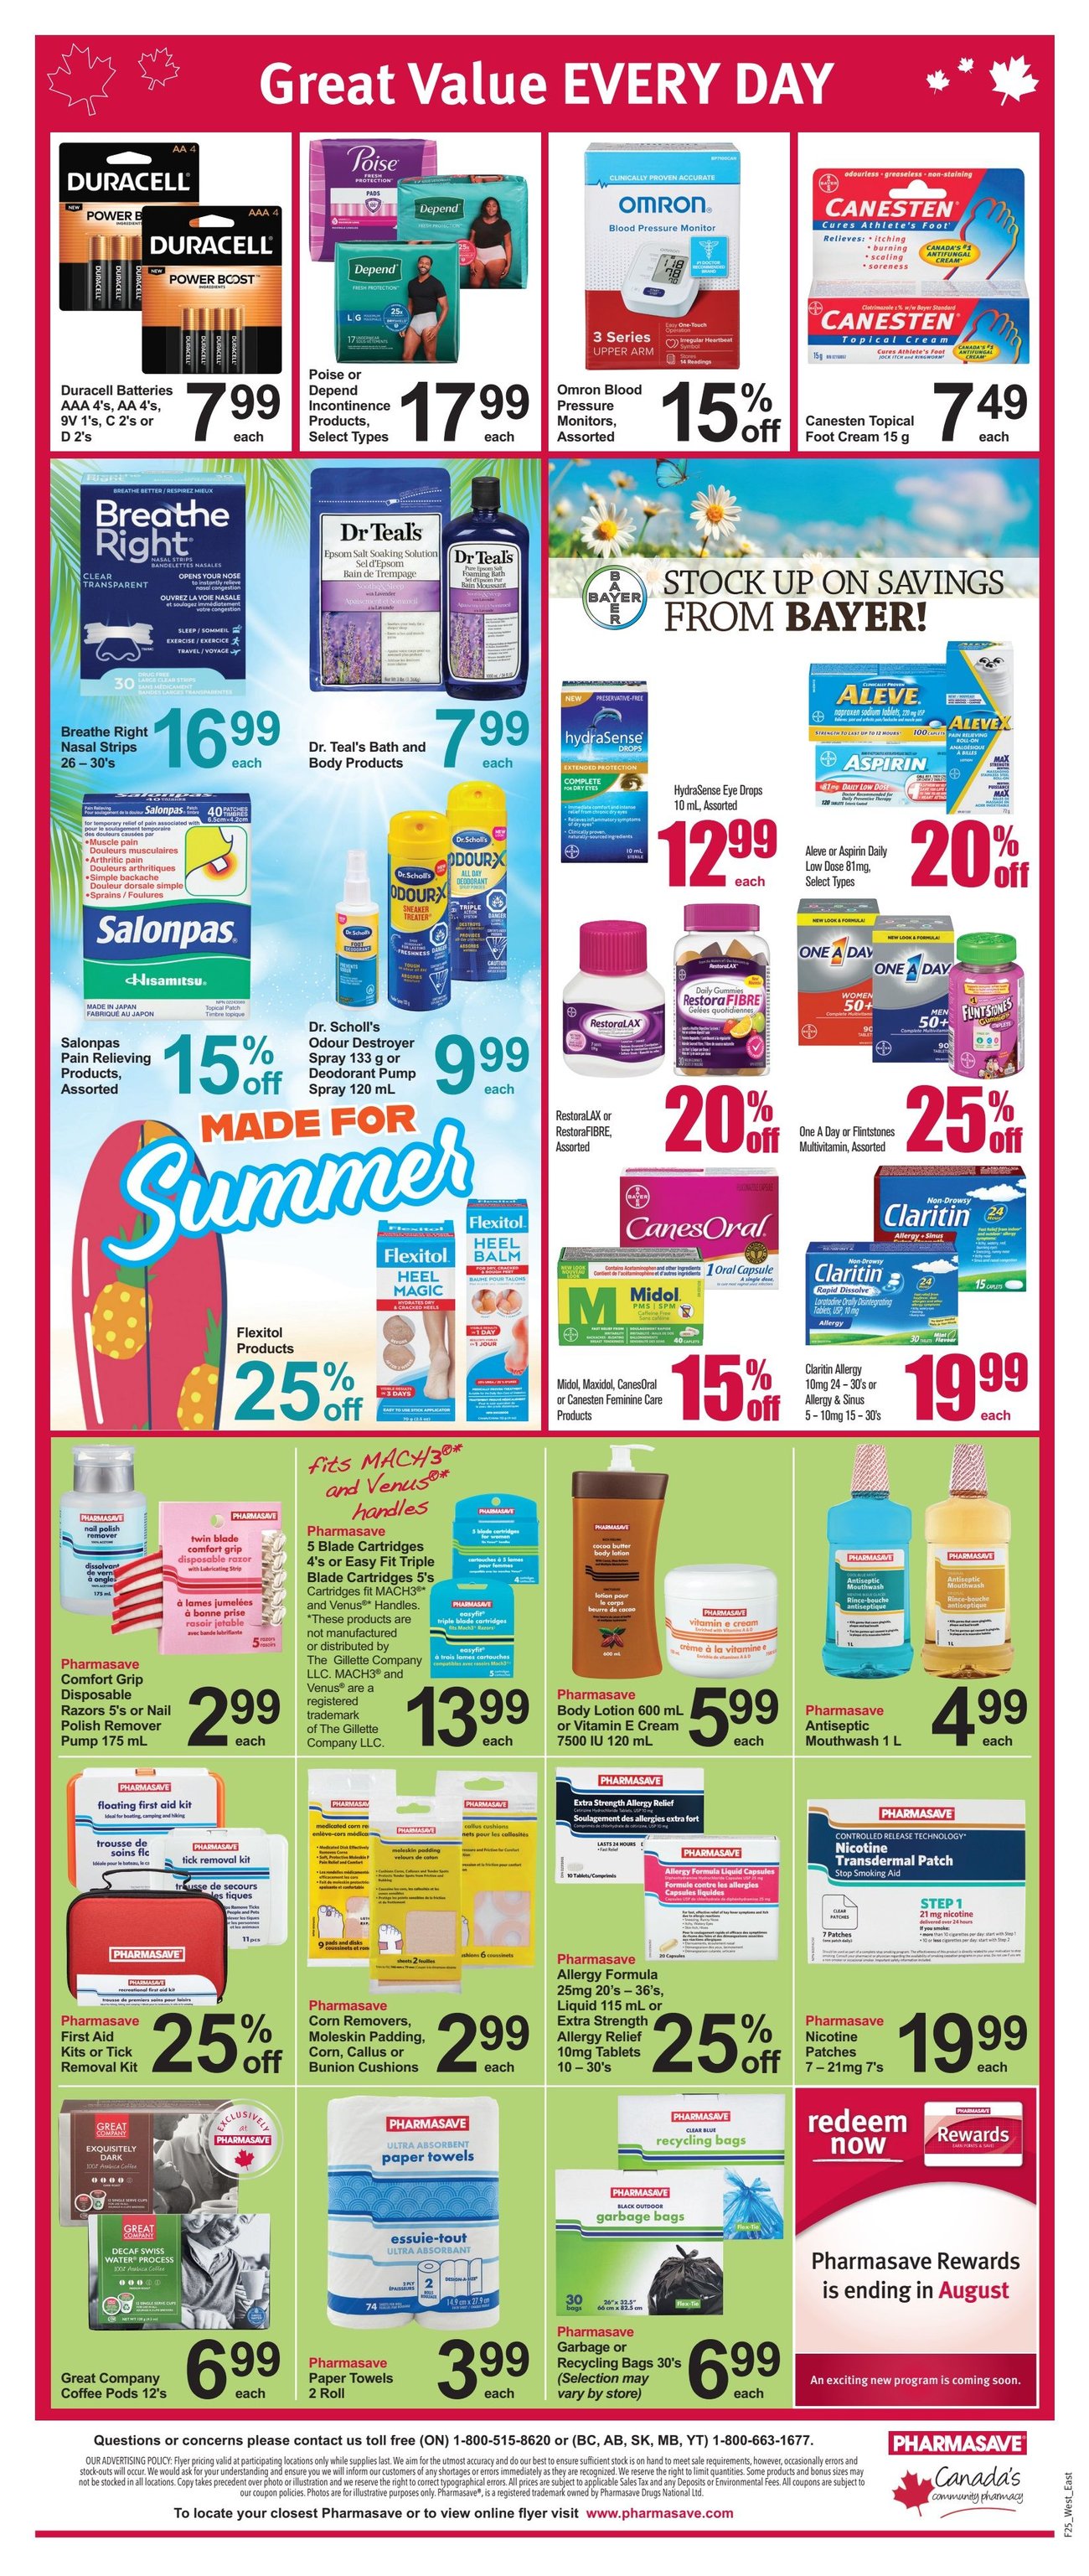 Pharmasave - Ontario - Weekly Flyer Specials - Page 4